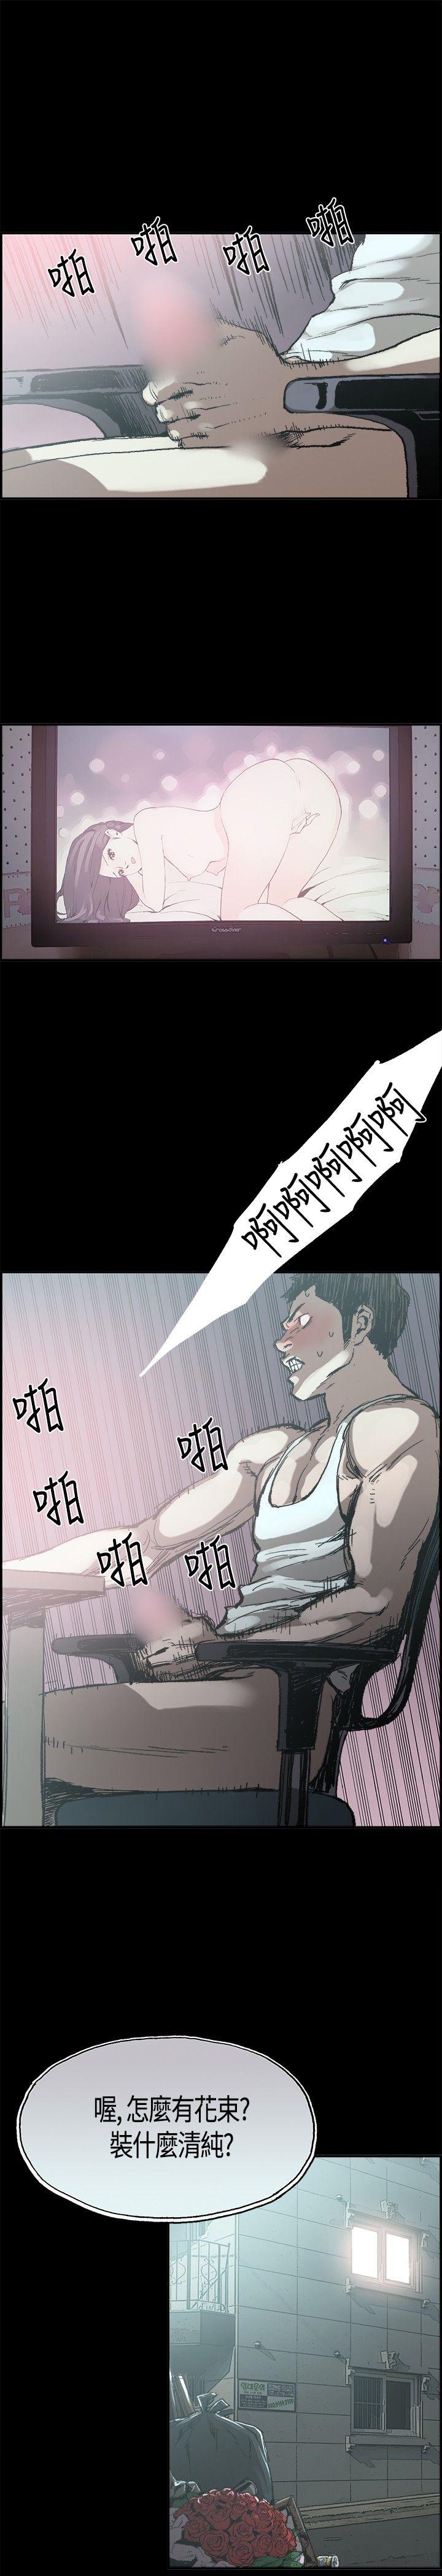 Scandal 同居【chinese】1-15 Dick Sucking - Page 5